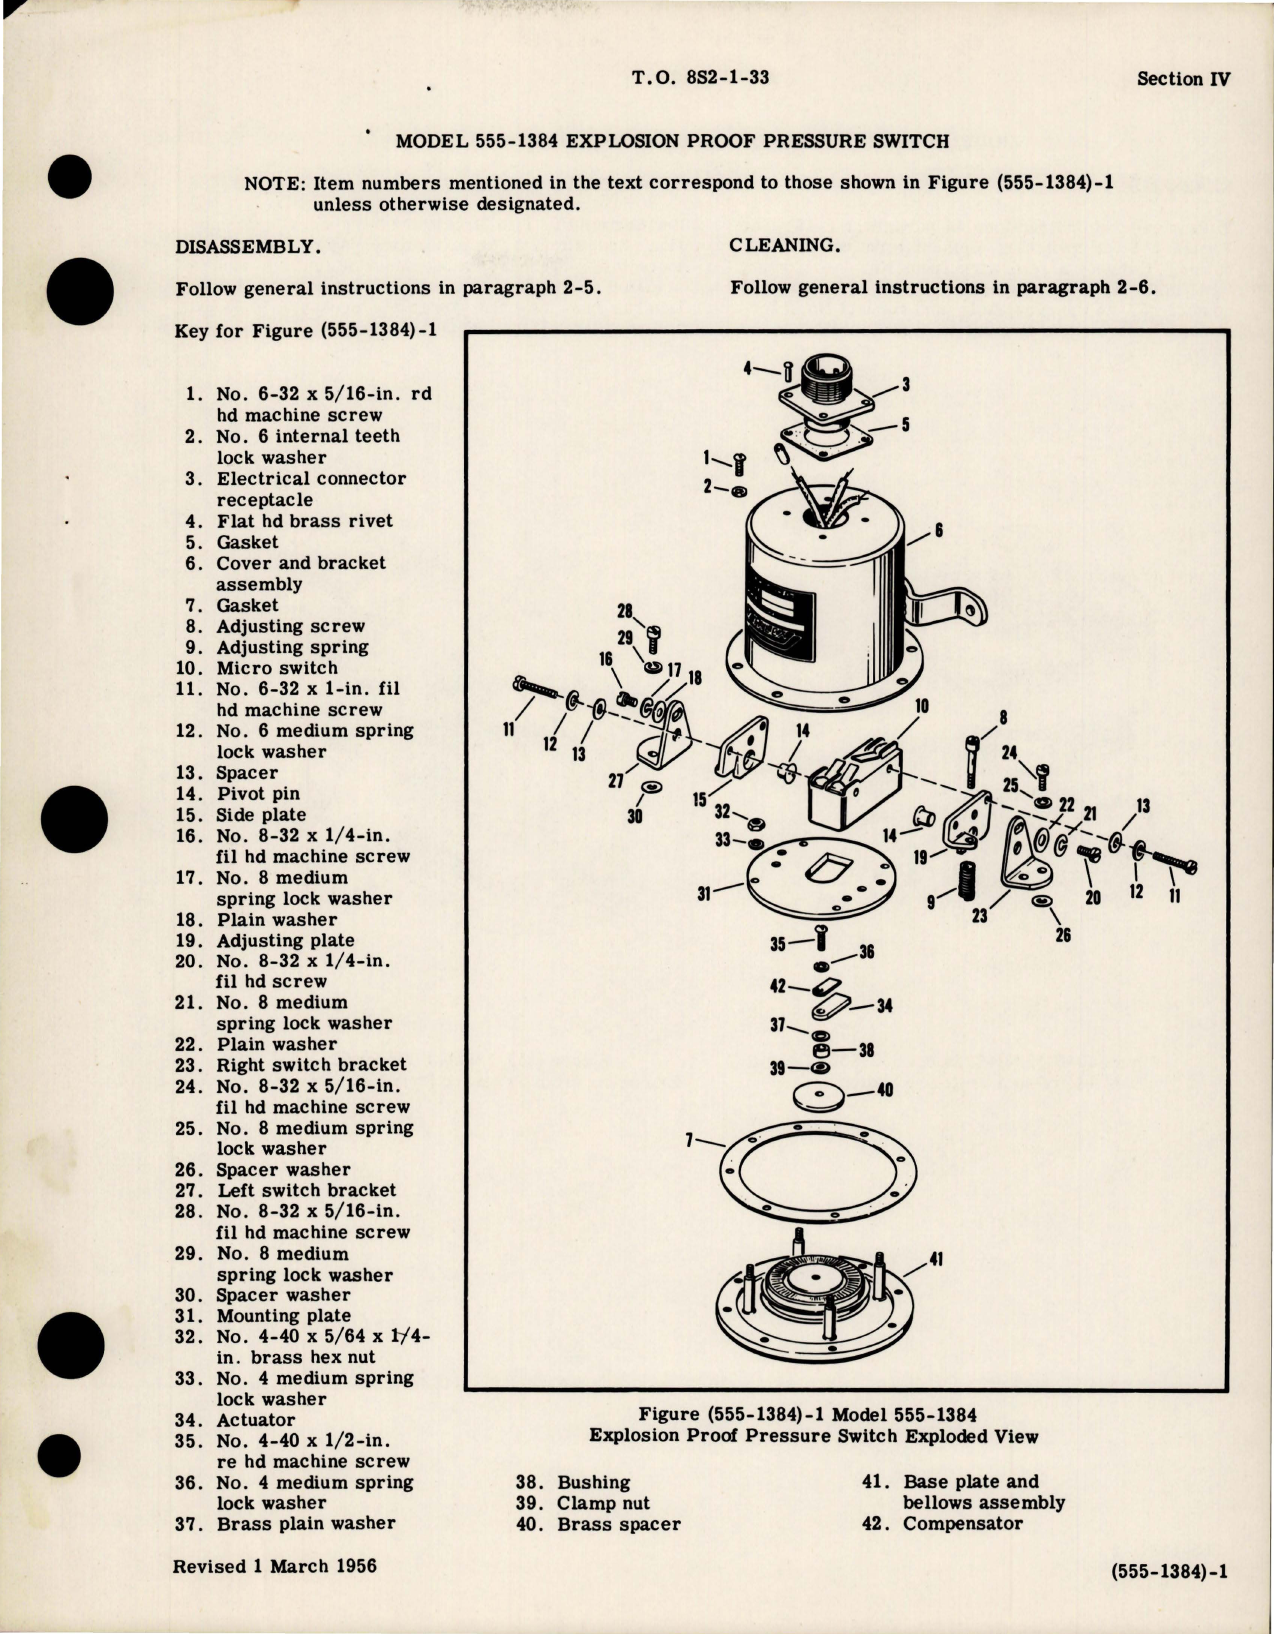 Sample page 7 from AirCorps Library document: Overhaul Instructions for Pressure Control Switch 